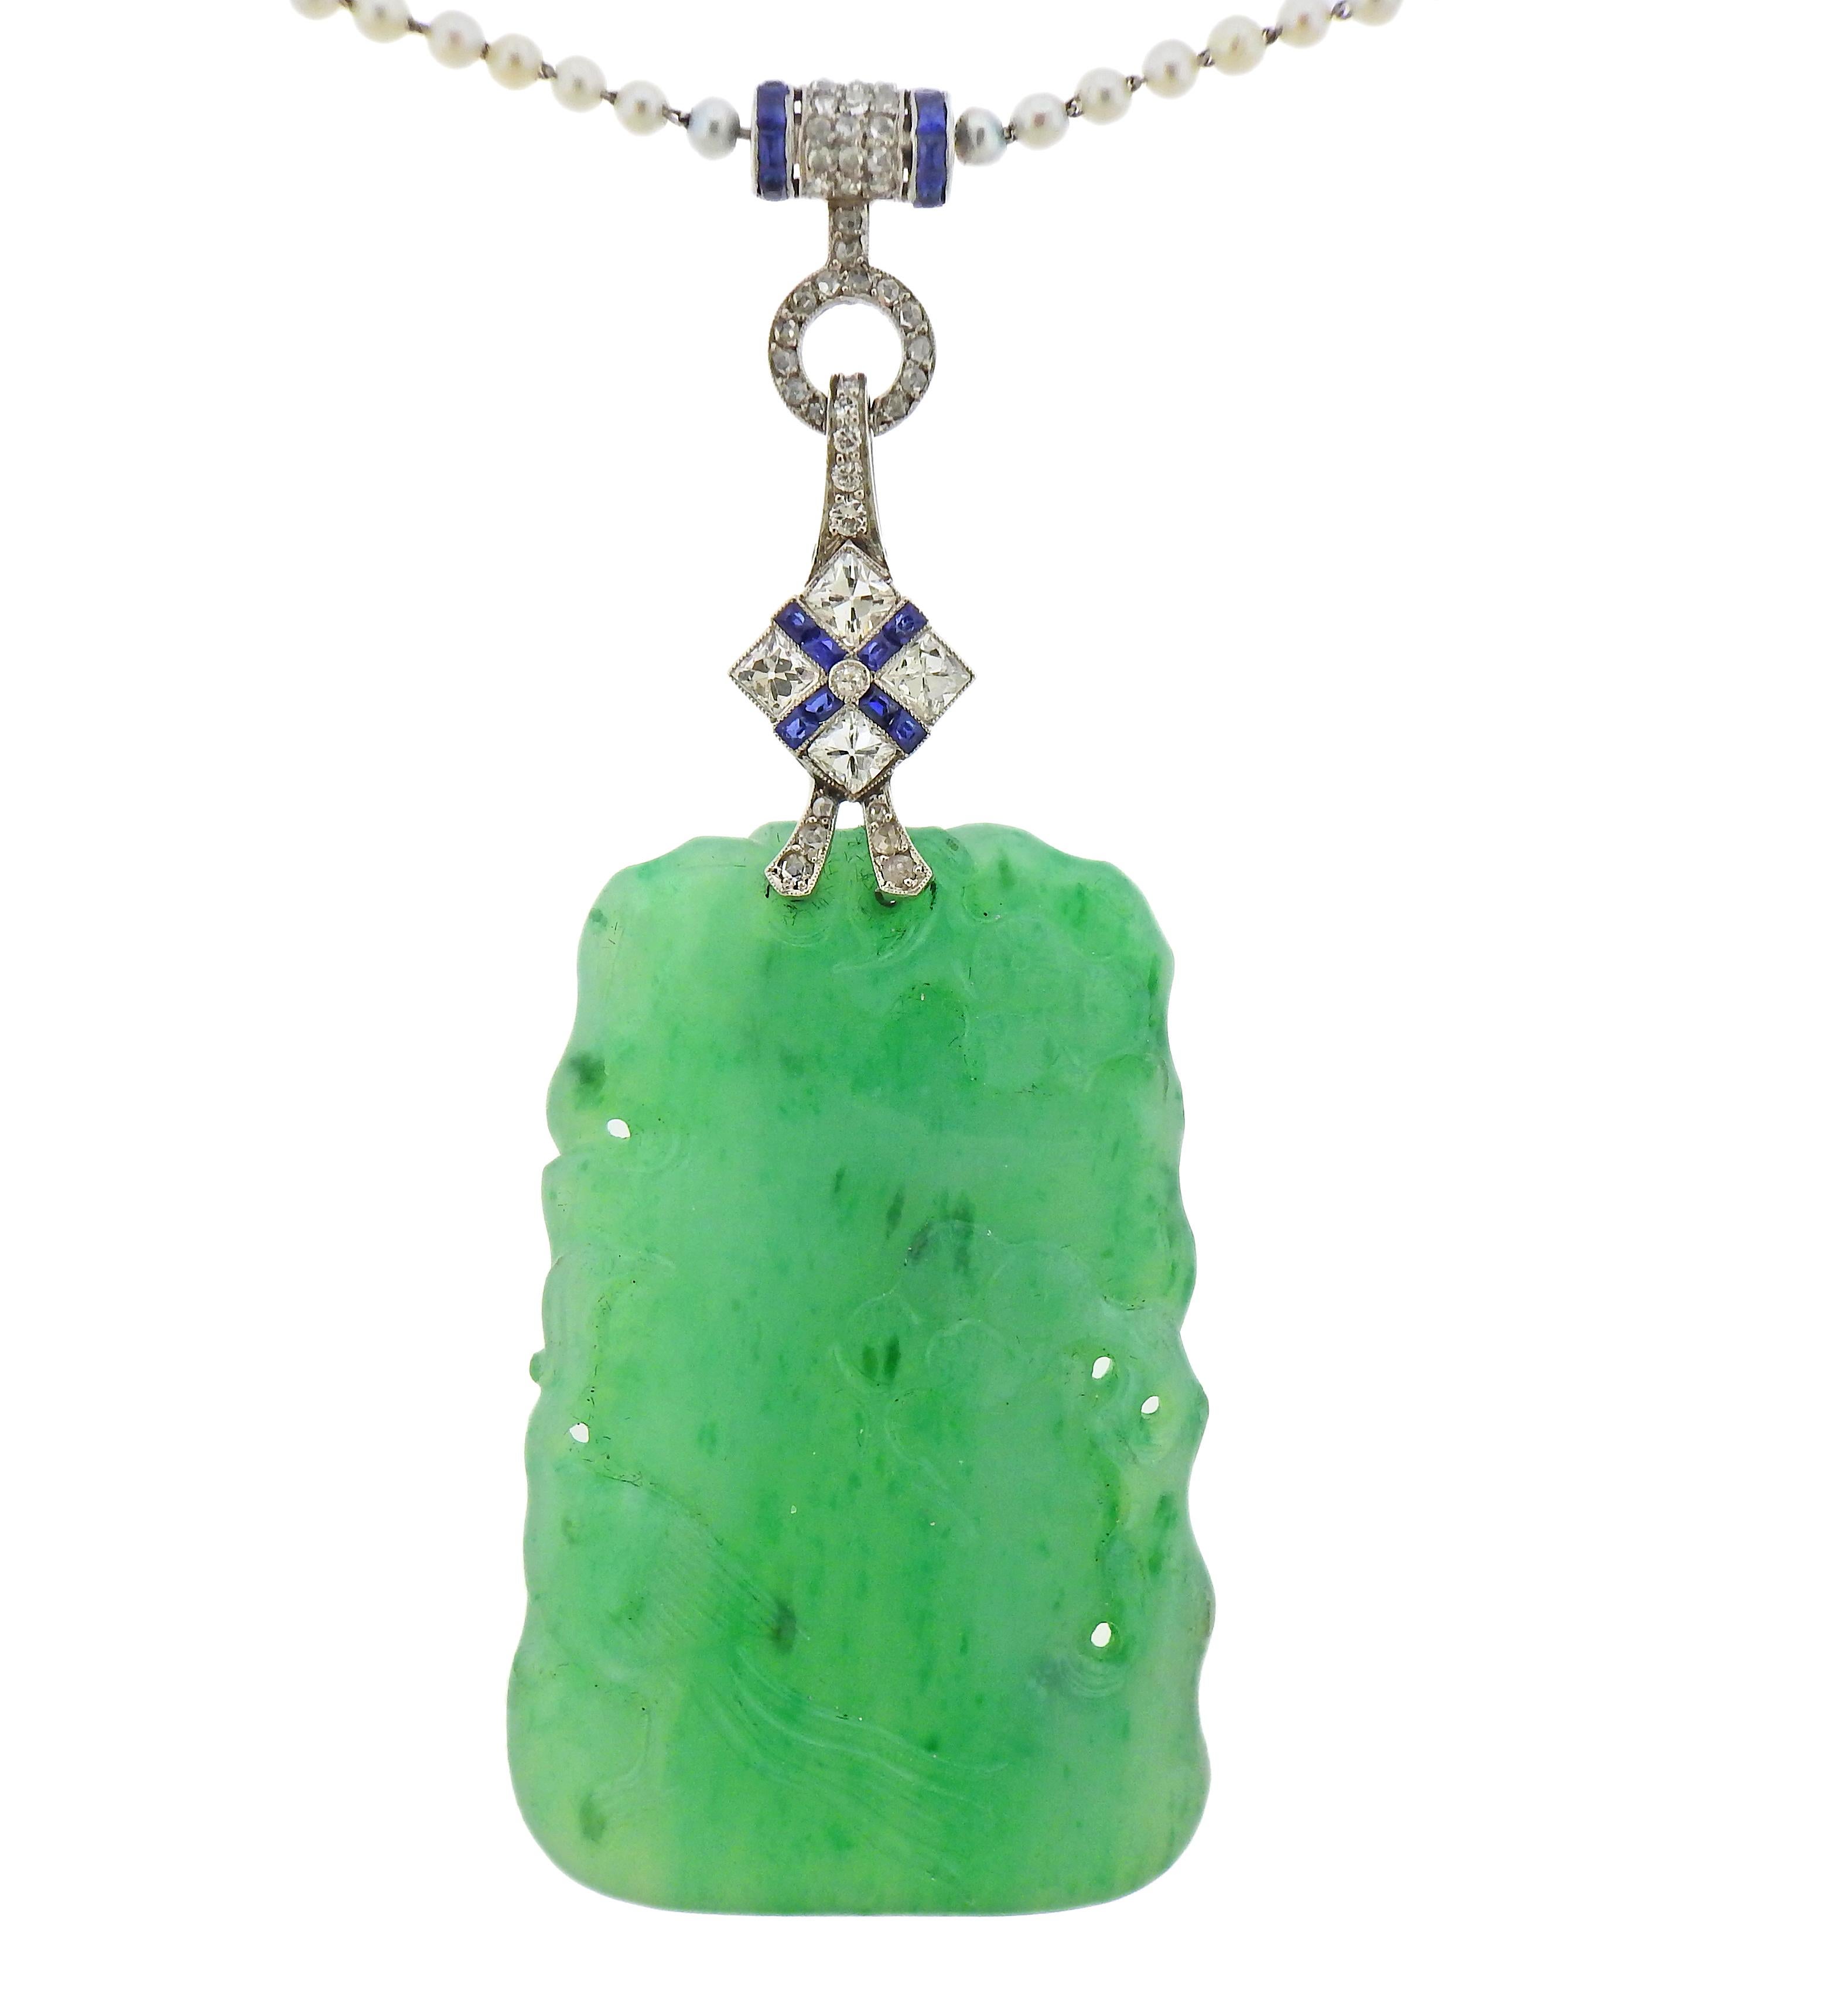 Art Deco platinum necklace with pendant, by Tiffany & Co, featuring carved jade2.5-3mm pearls, blue sapphires and approx. 3.00ctw in diamonds.  Jade in pendant measures 53mm x 35nn x 6.2mm, jade elements in the necklace measure 23mm x 6mm (as the